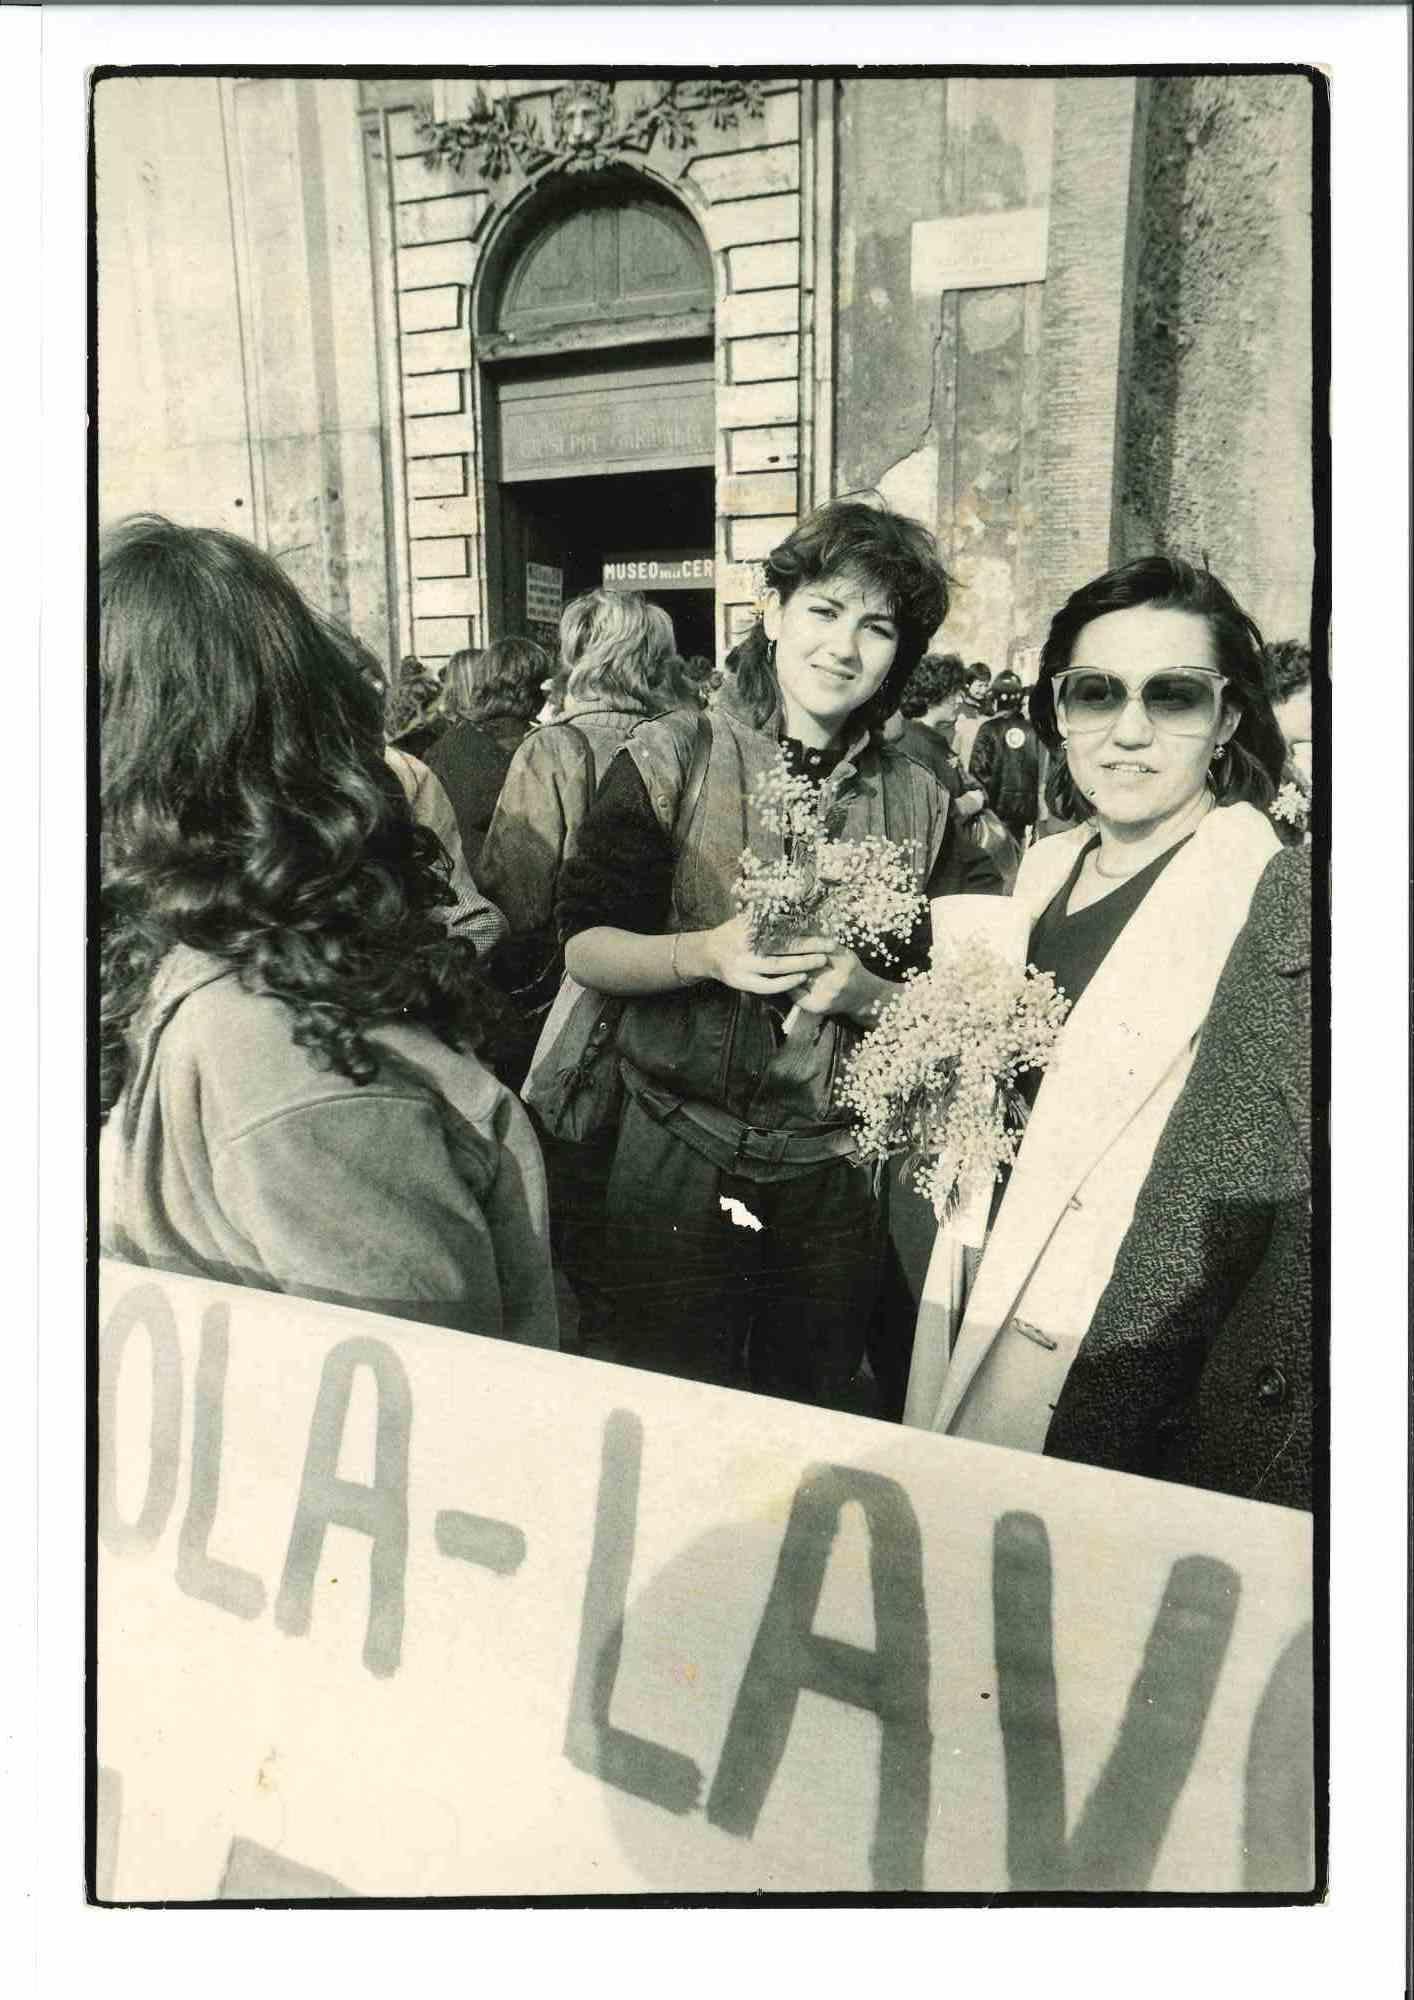 Unknown Figurative Photograph - Women's Rights Movement - Historical Photo -1970s